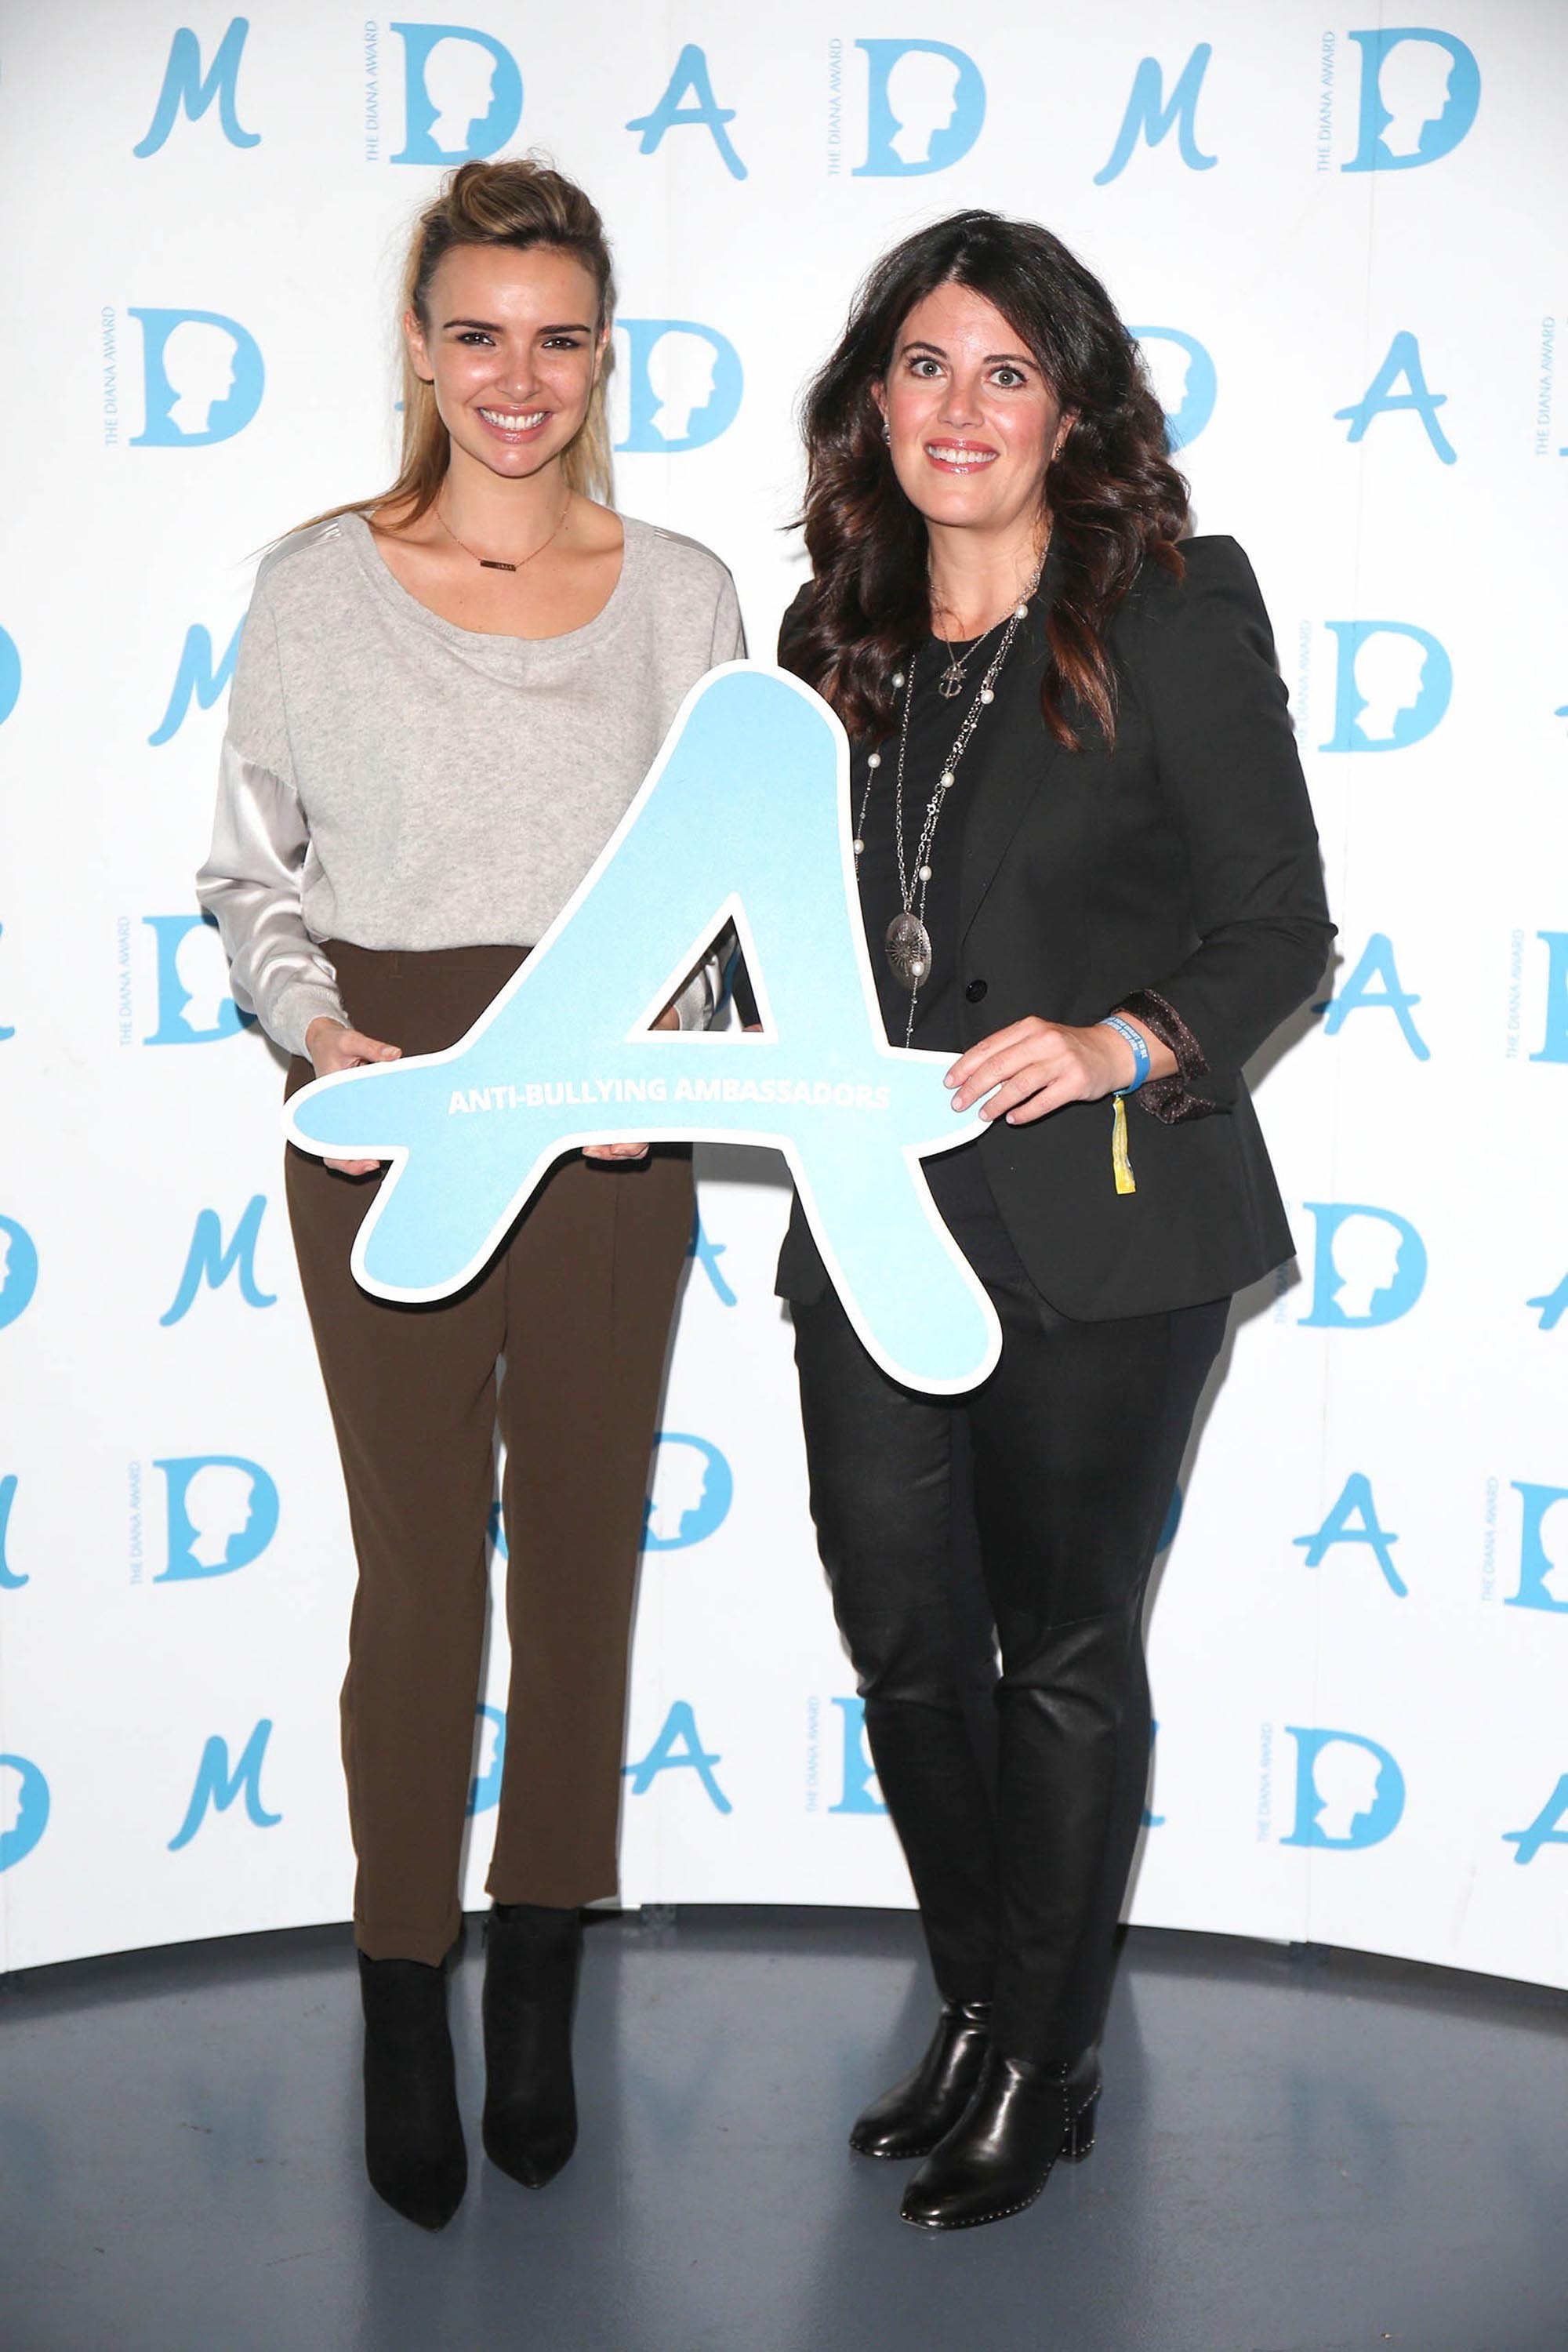 Monica Lewinsky attends The Diana Awards Anti Bullying Campaign